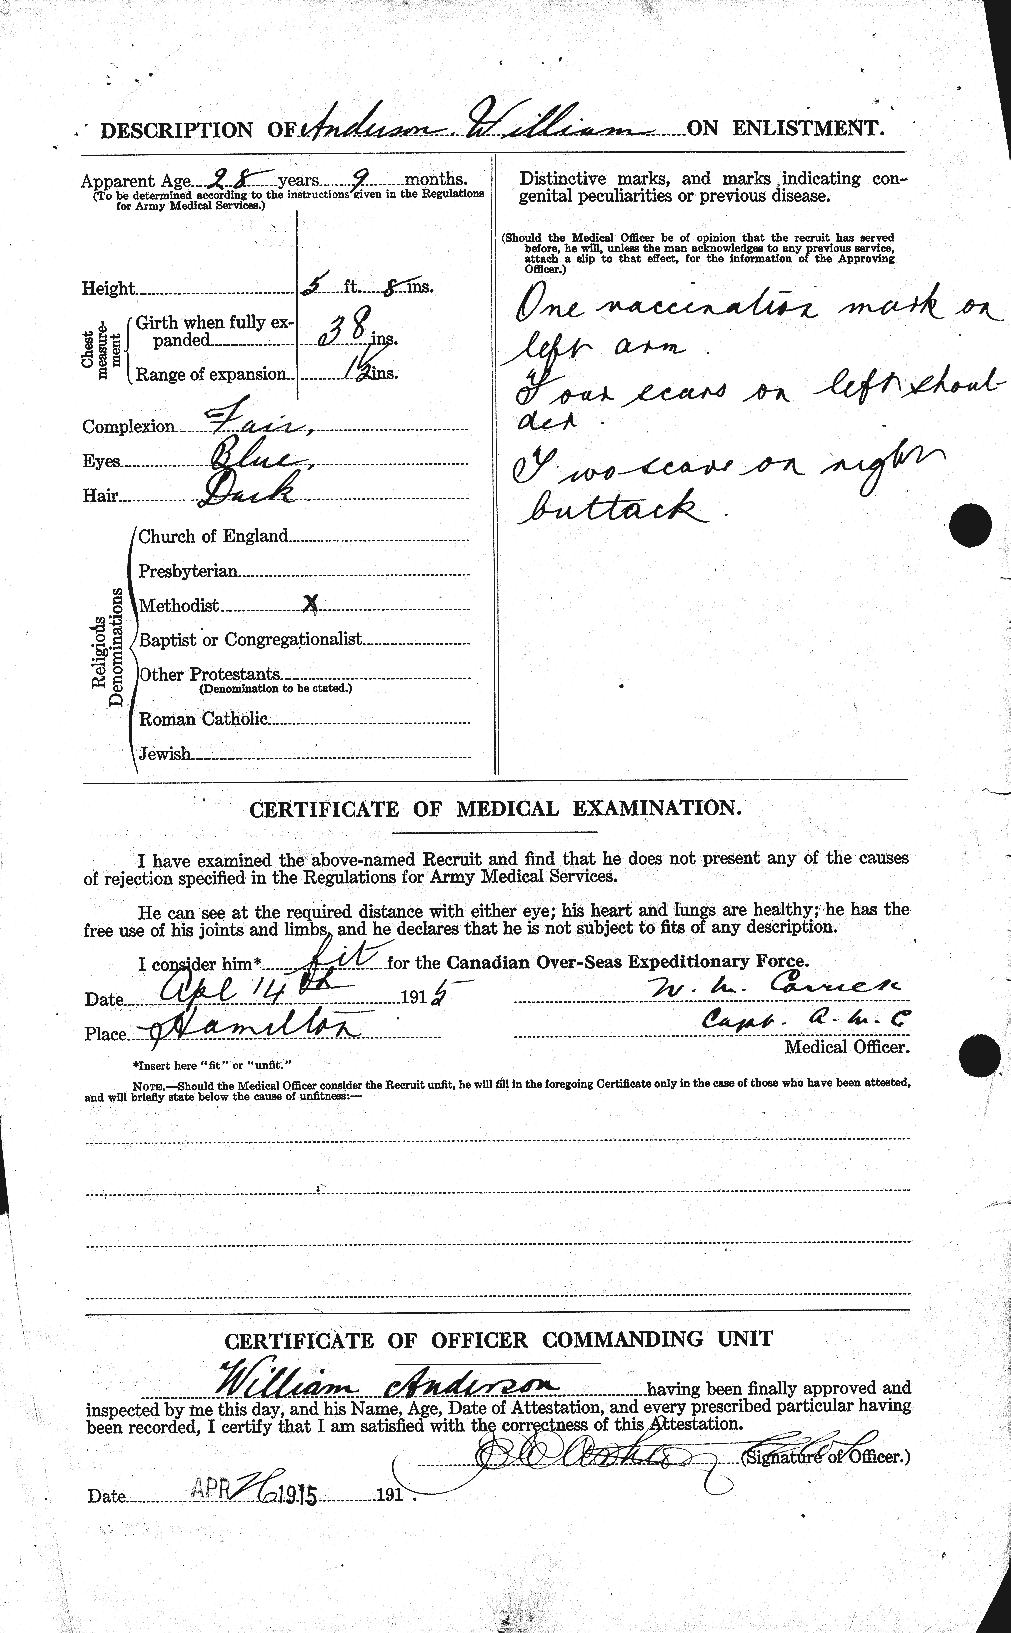 Personnel Records of the First World War - CEF 210753b